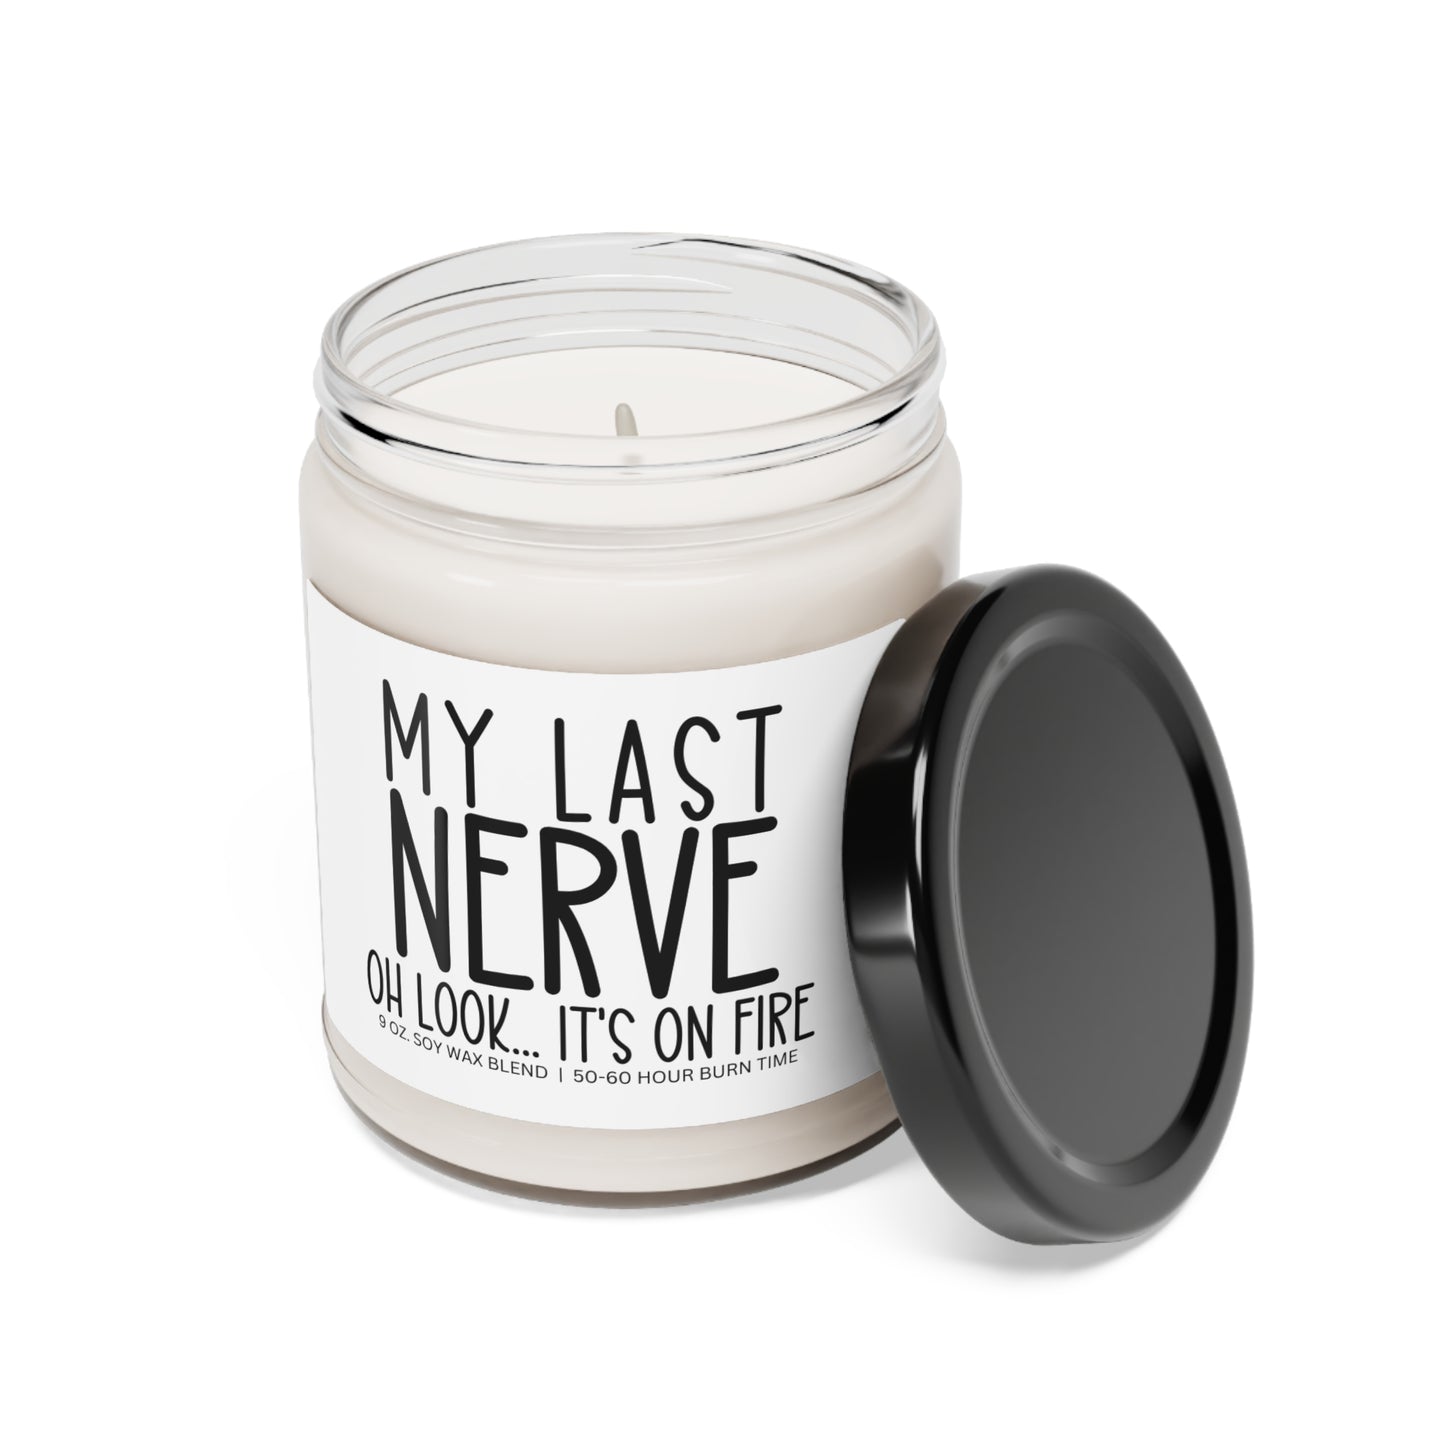 My Last Nerve Scented Soy Candle, 9oz